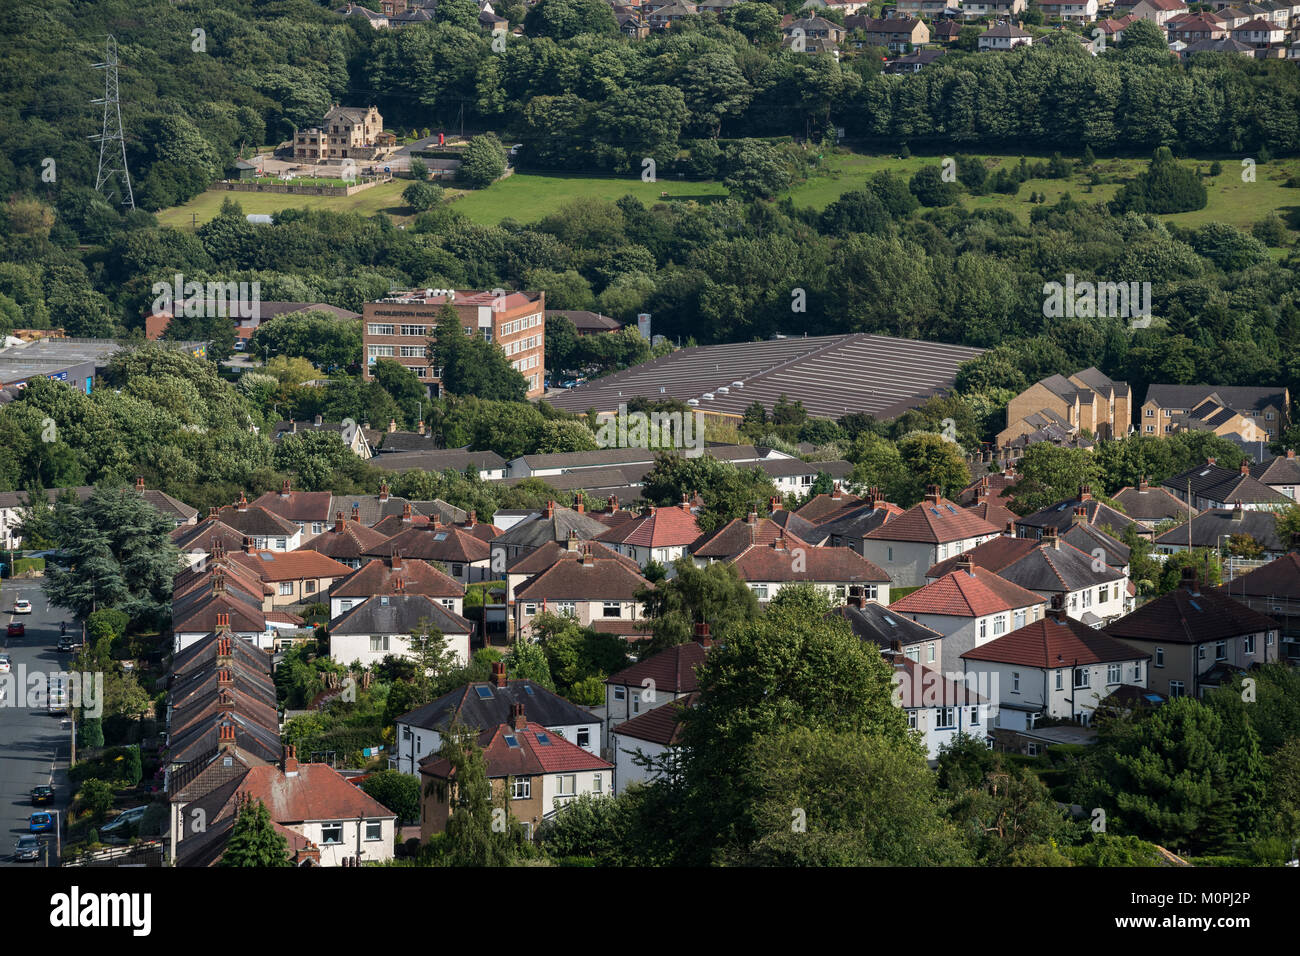 High view of Baildon town area - semi-detached houses in residential urban suburb & industrial units beyond. Bradford, West Yorkshire, England, UK. Stock Photo